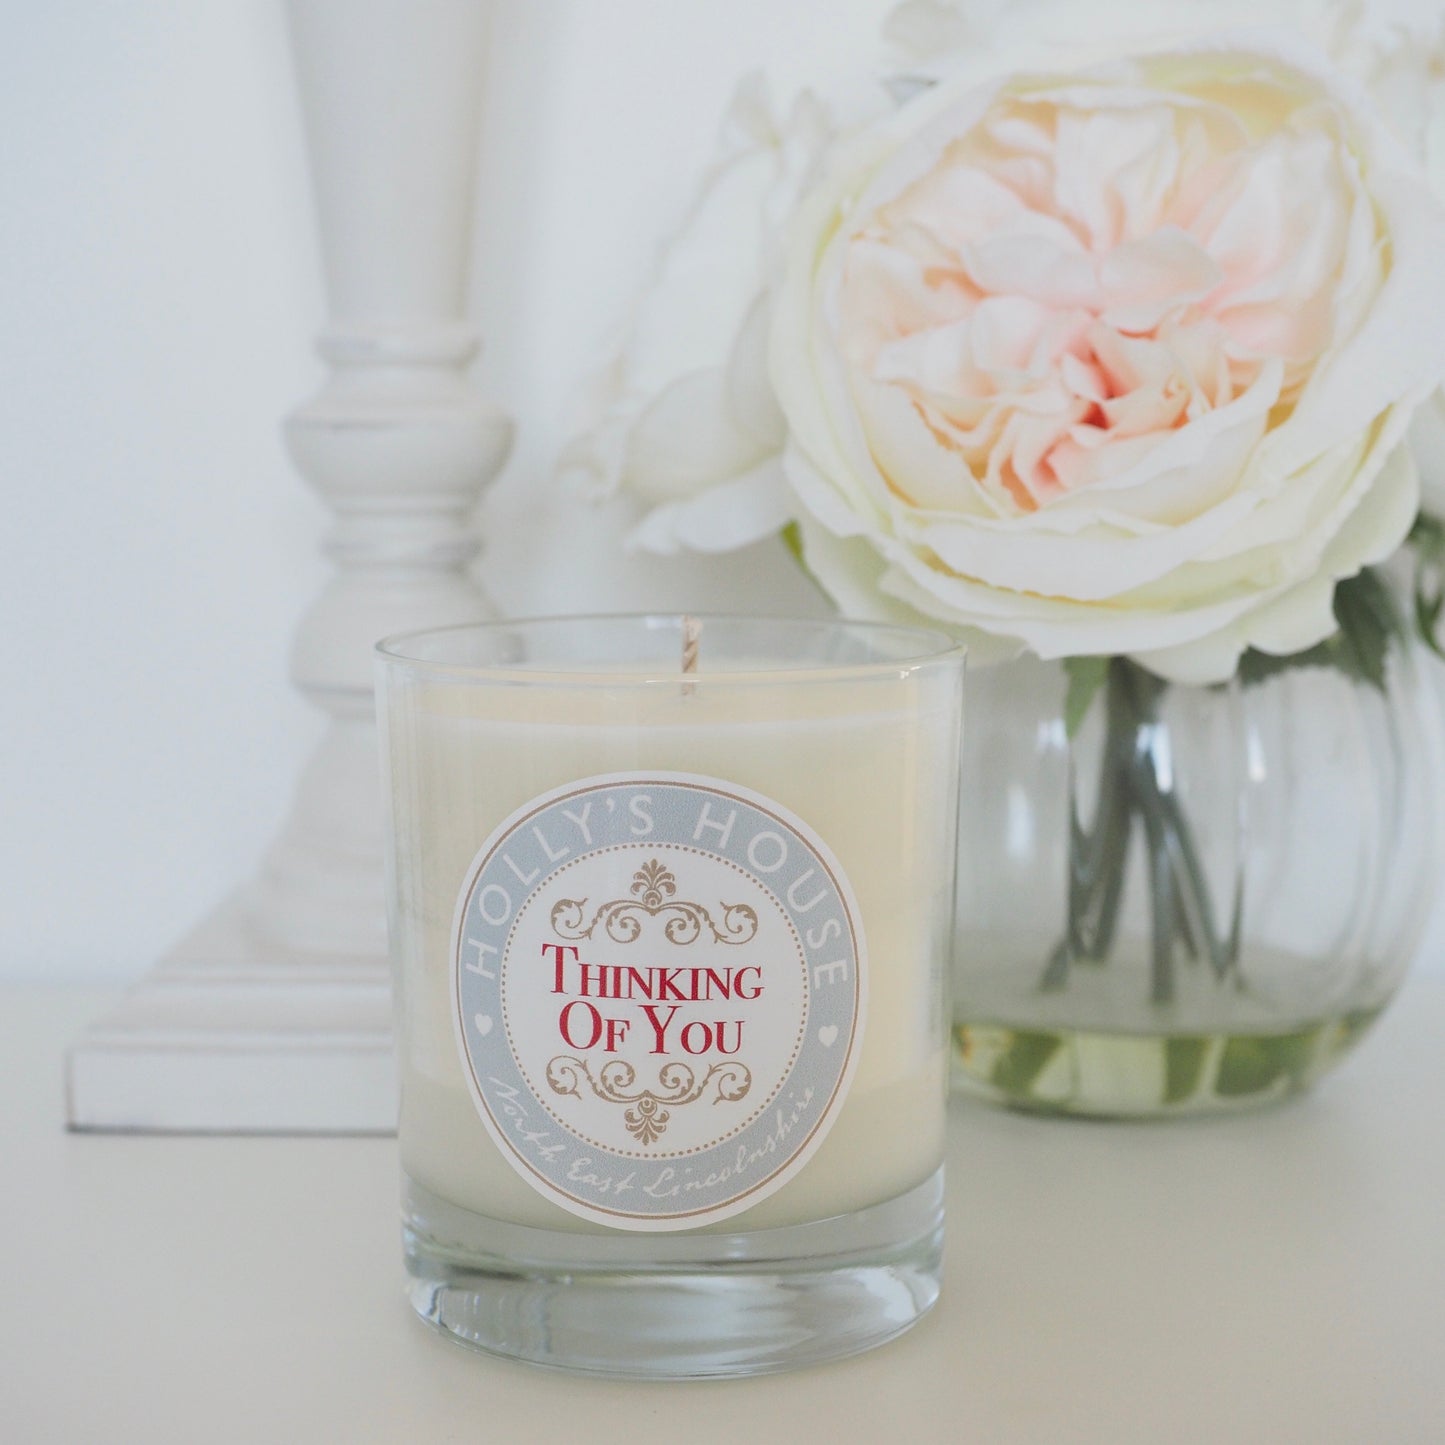 Thinking Of You Scented Candle